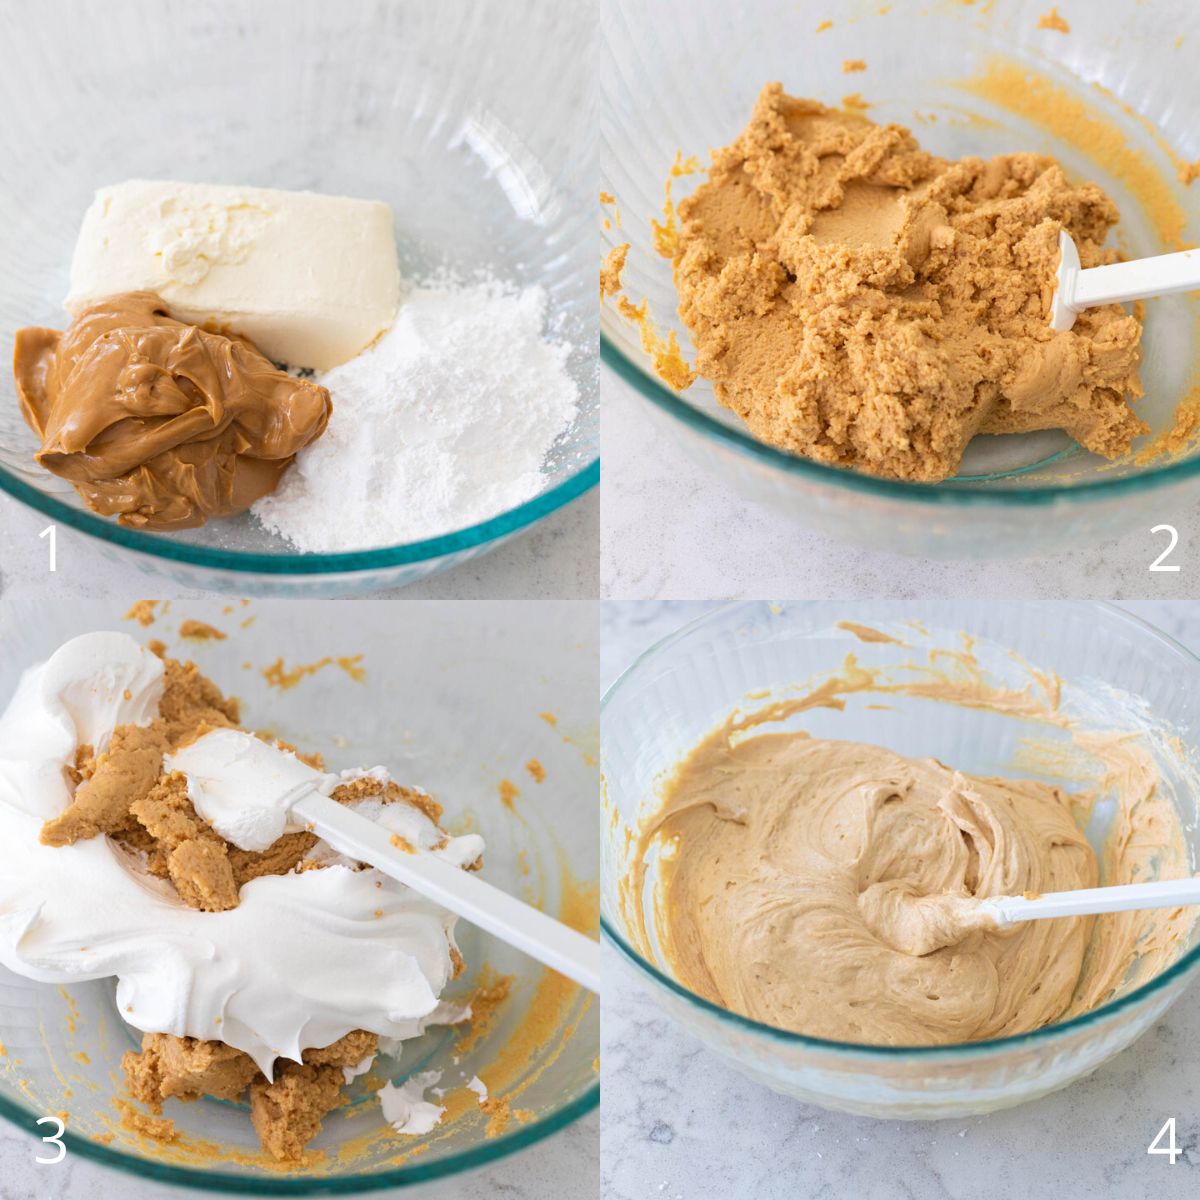 The step by step photos show how to mix the cream cheese, peanut butter, and powdered sugar to make the pie filling.